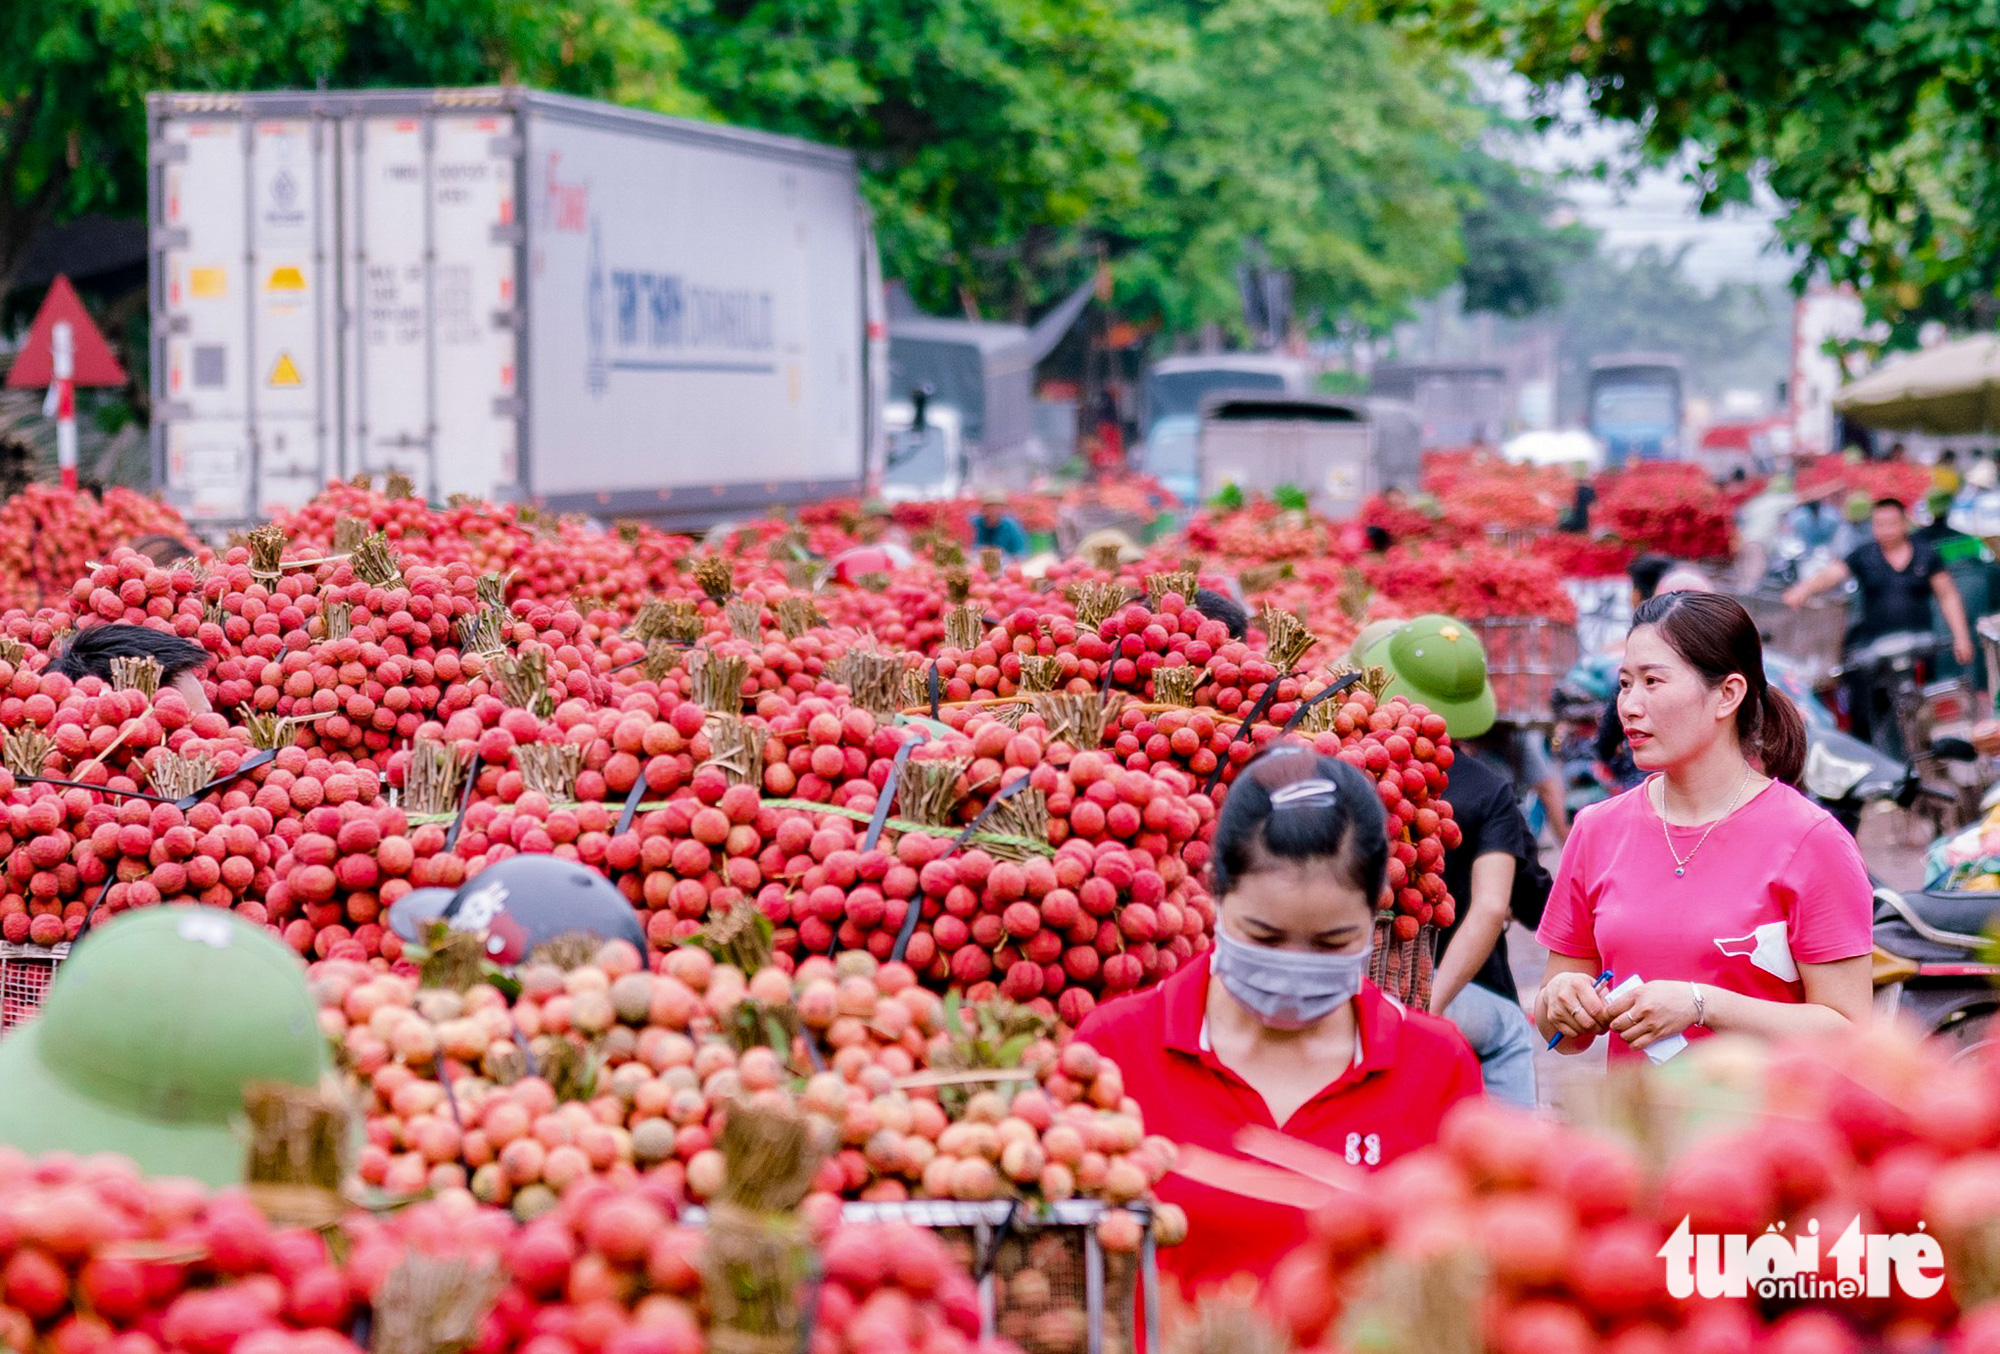 Farmers in northern Vietnam busy shipping lychees to China